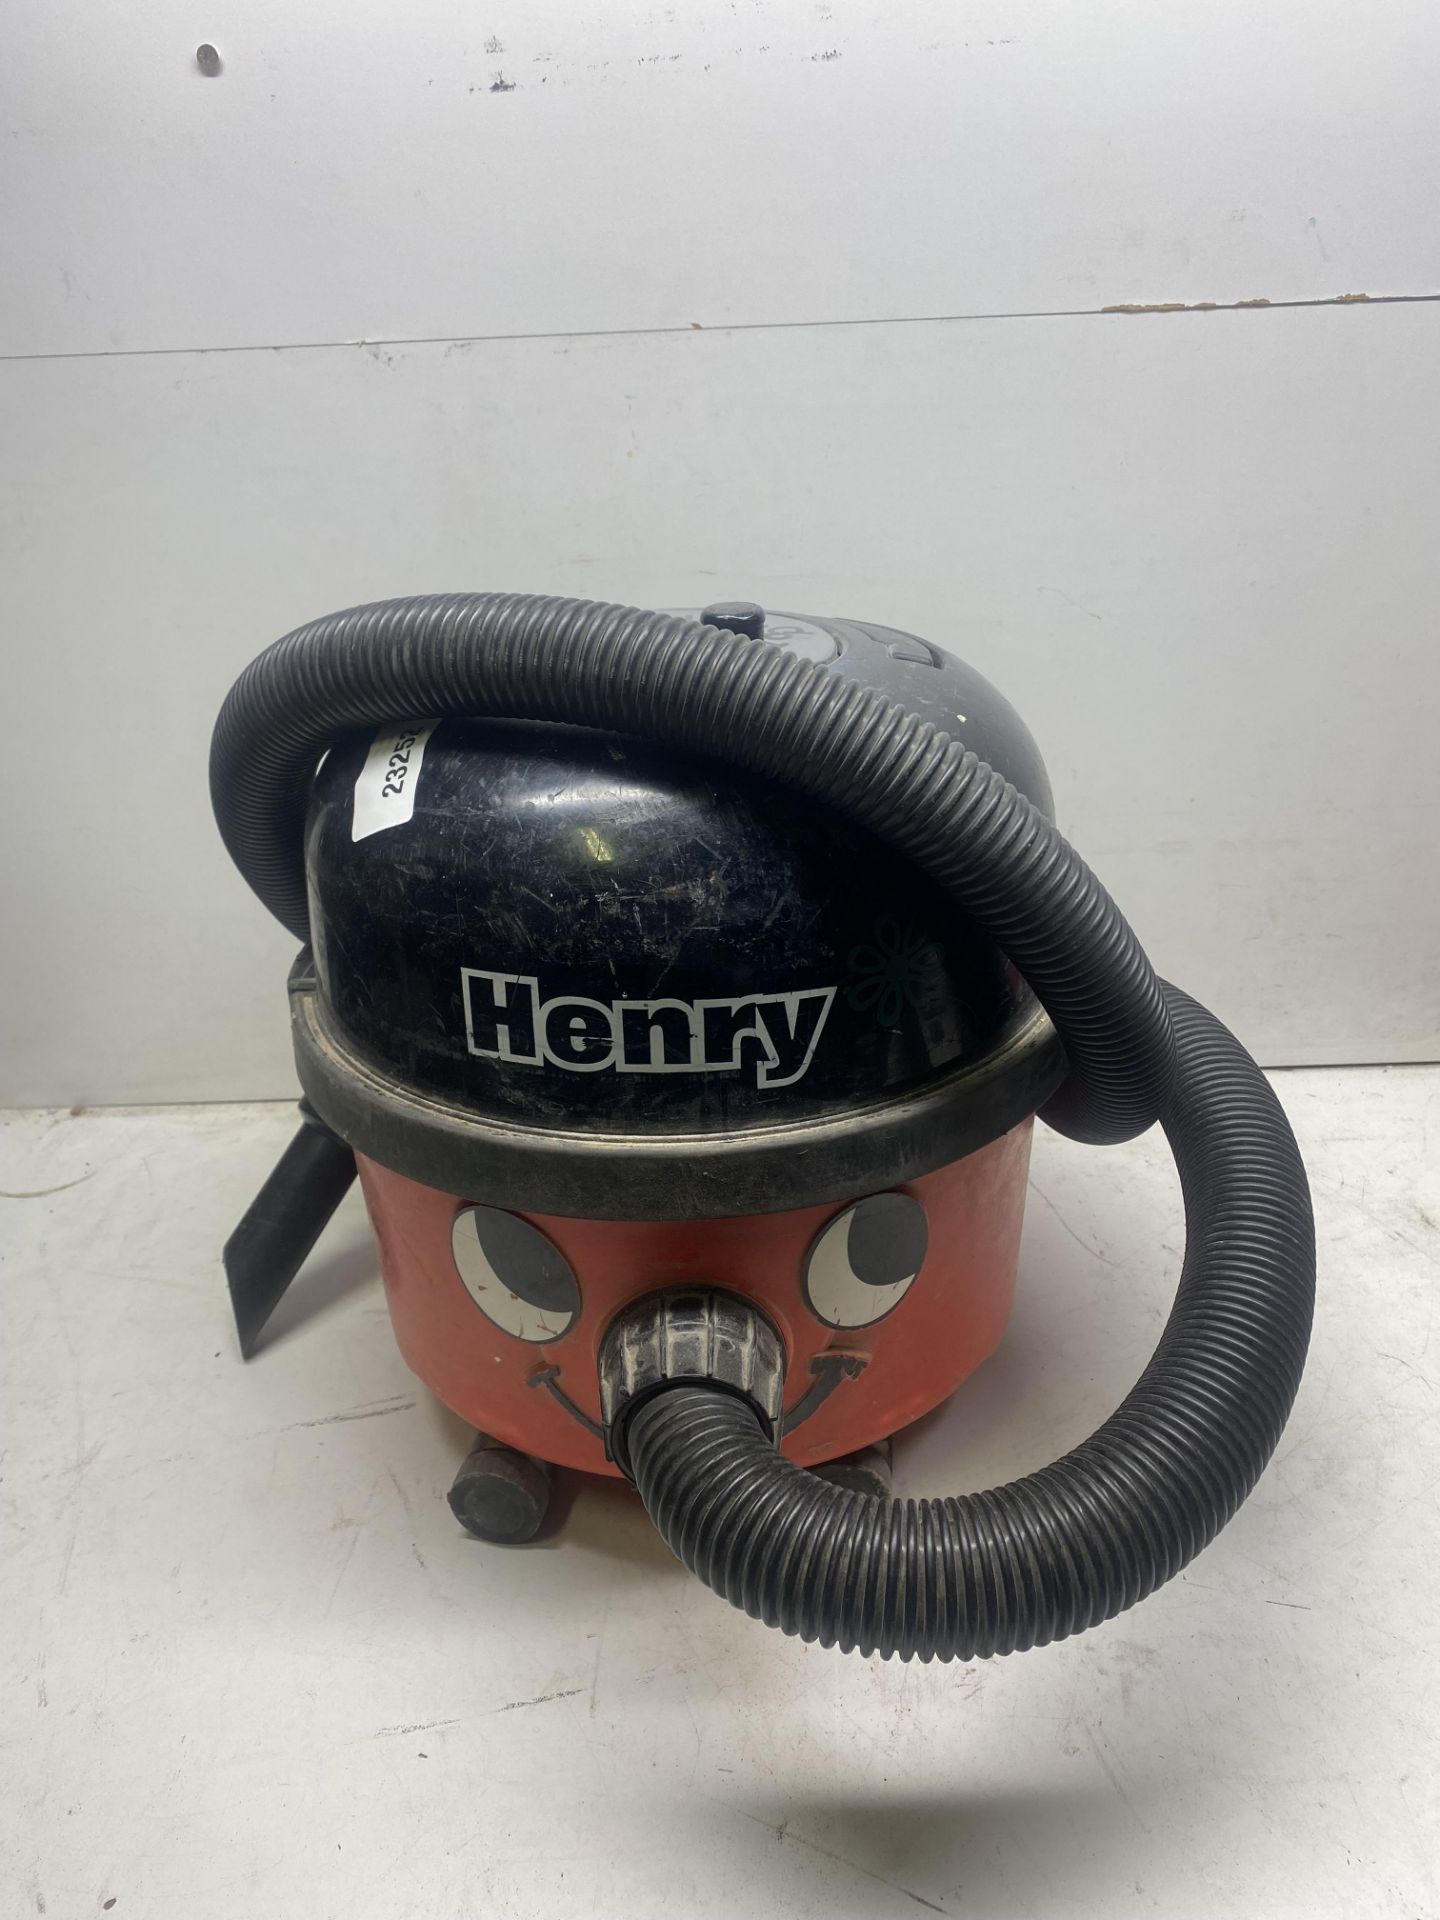 2 x Henry Commercial Corded Vacuum Cleaners - Image 2 of 9